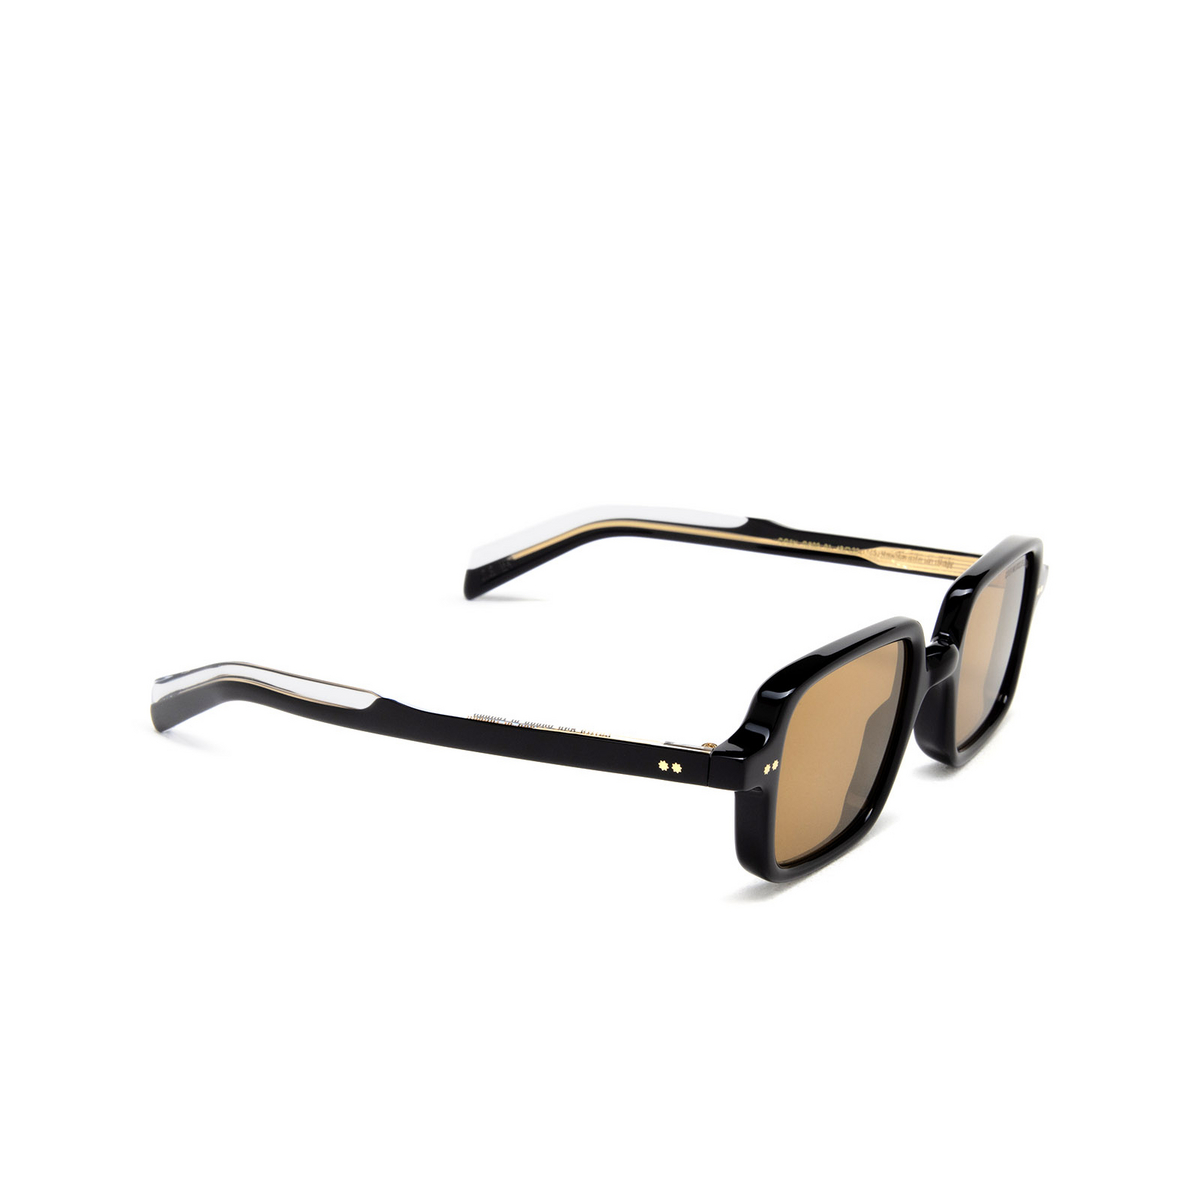 Cutler and Gross GR02 Sunglasses 01 Black - three-quarters view